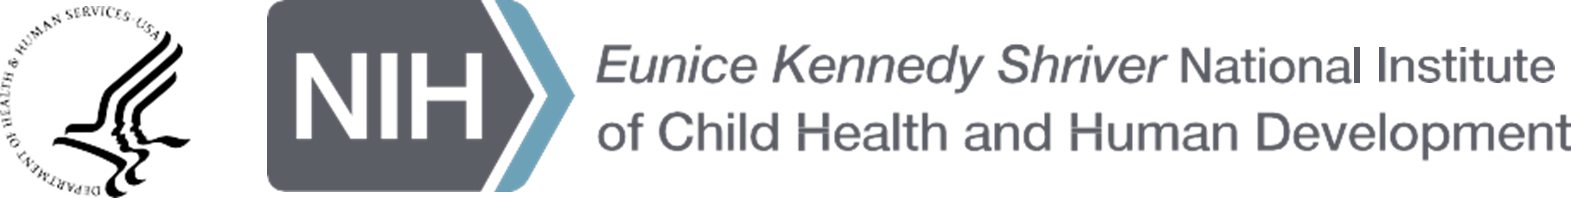 Department of Health and Human Services, National Institutes of Health, Eunice Kennedy Shriver National Institute of Child Health and Human Development, Division of Population Health Research